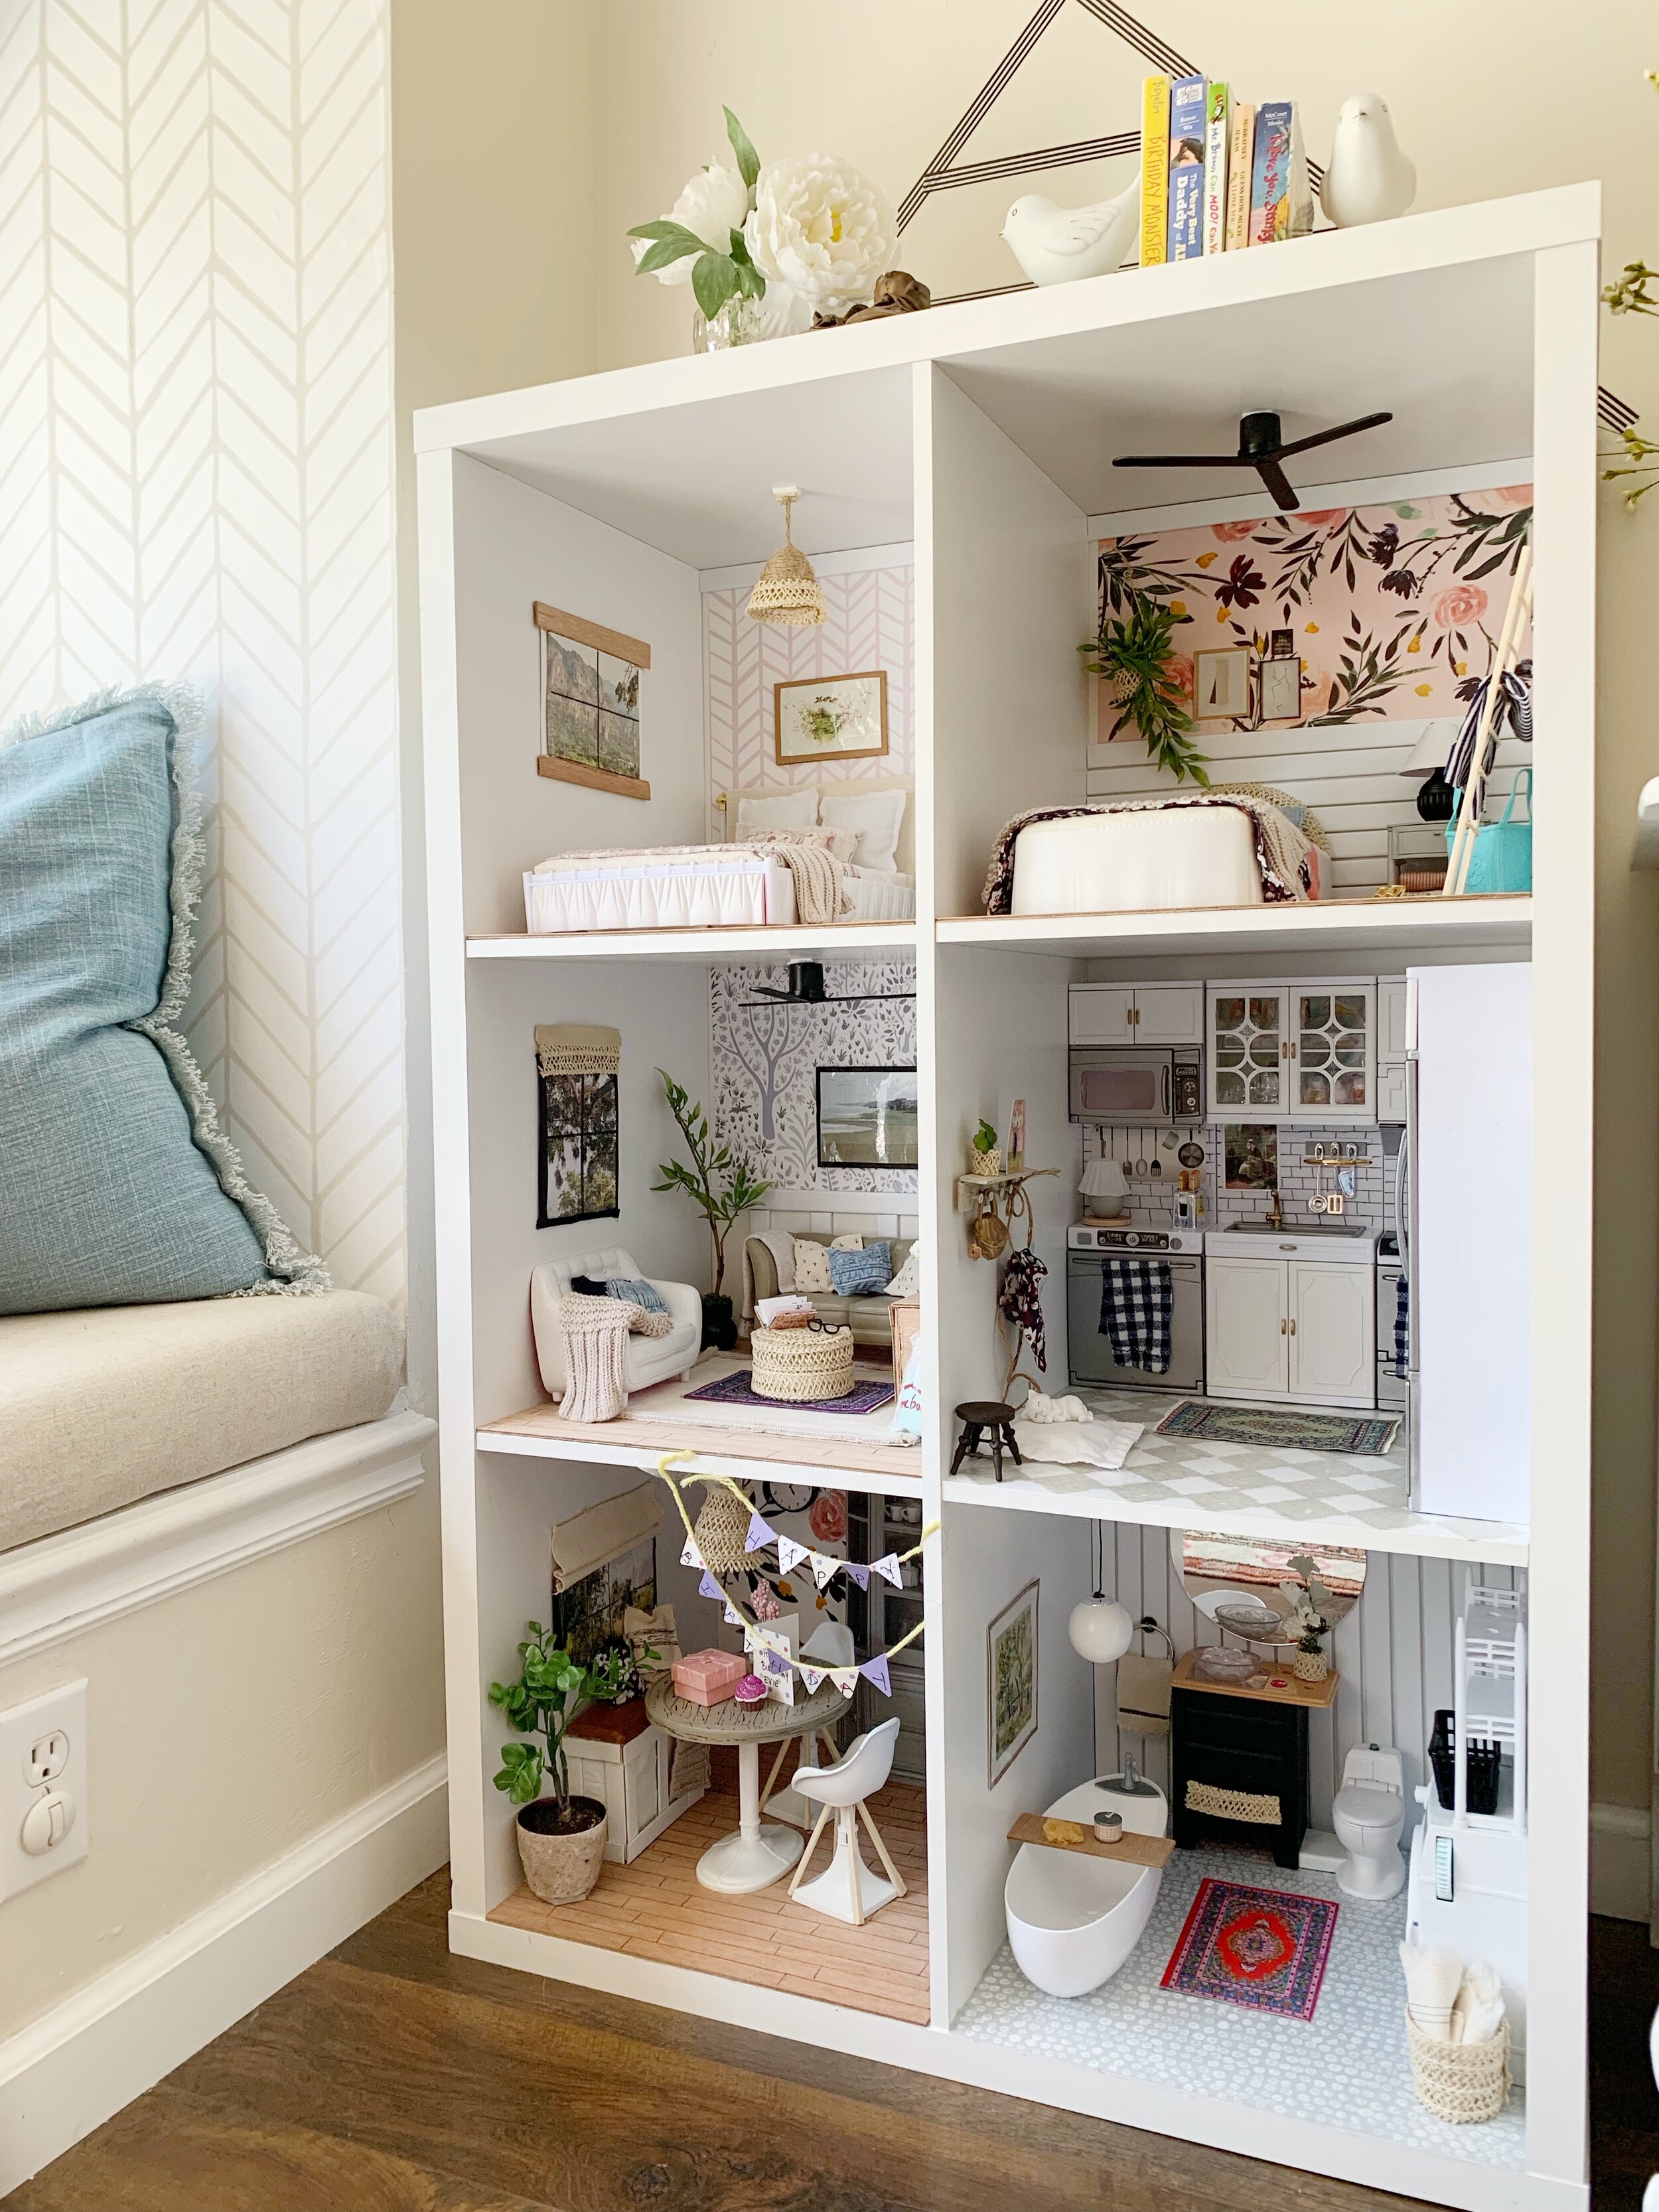 how to make a doll house easy way